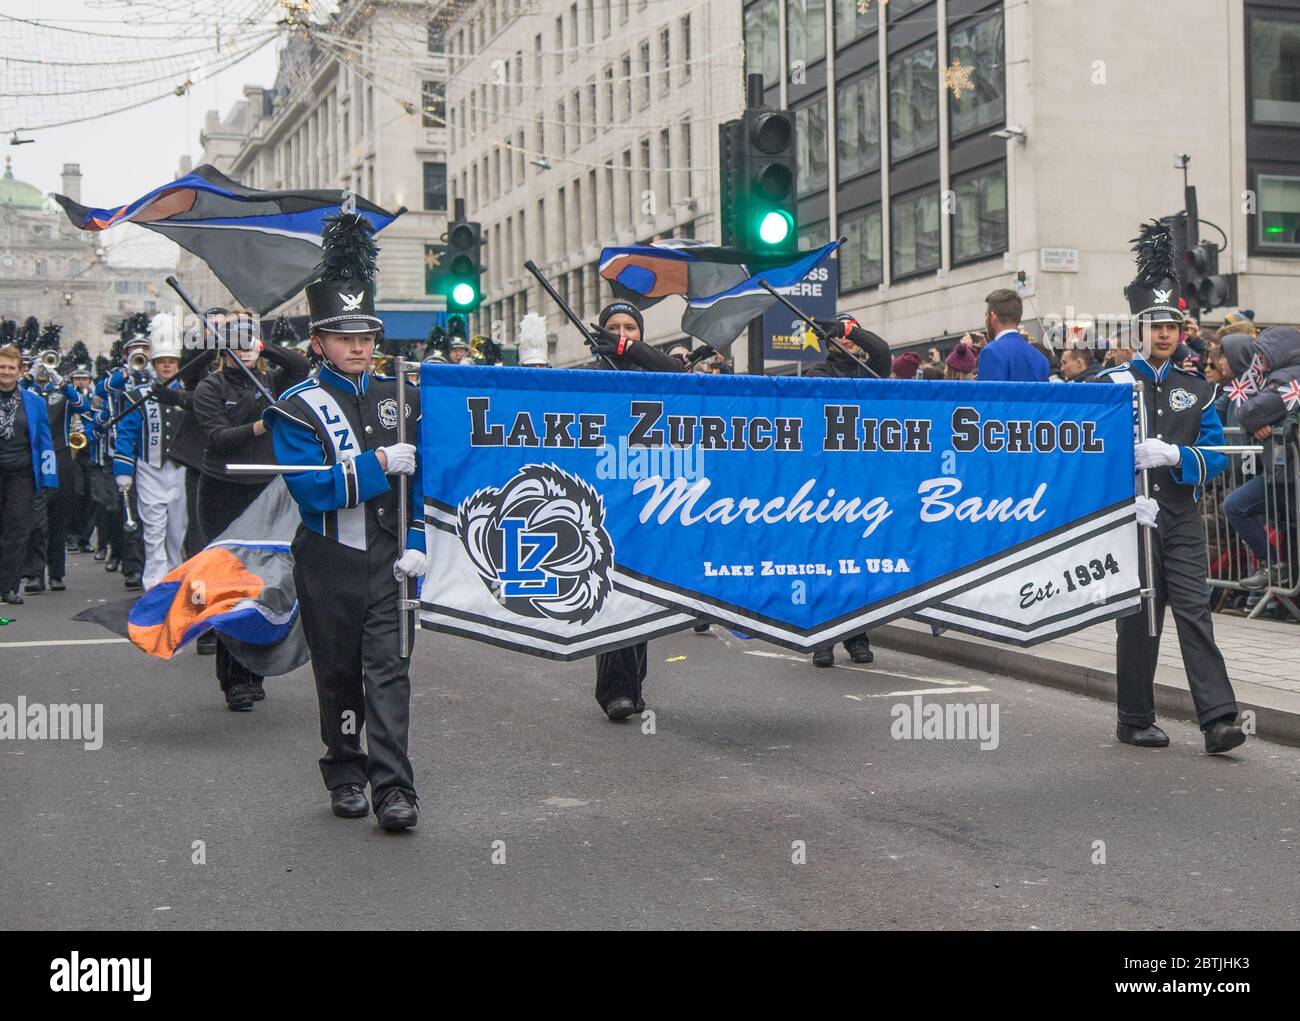 London New Year's Day Parade 2020, Lake Zurich High School Marching Band. Stock Photo